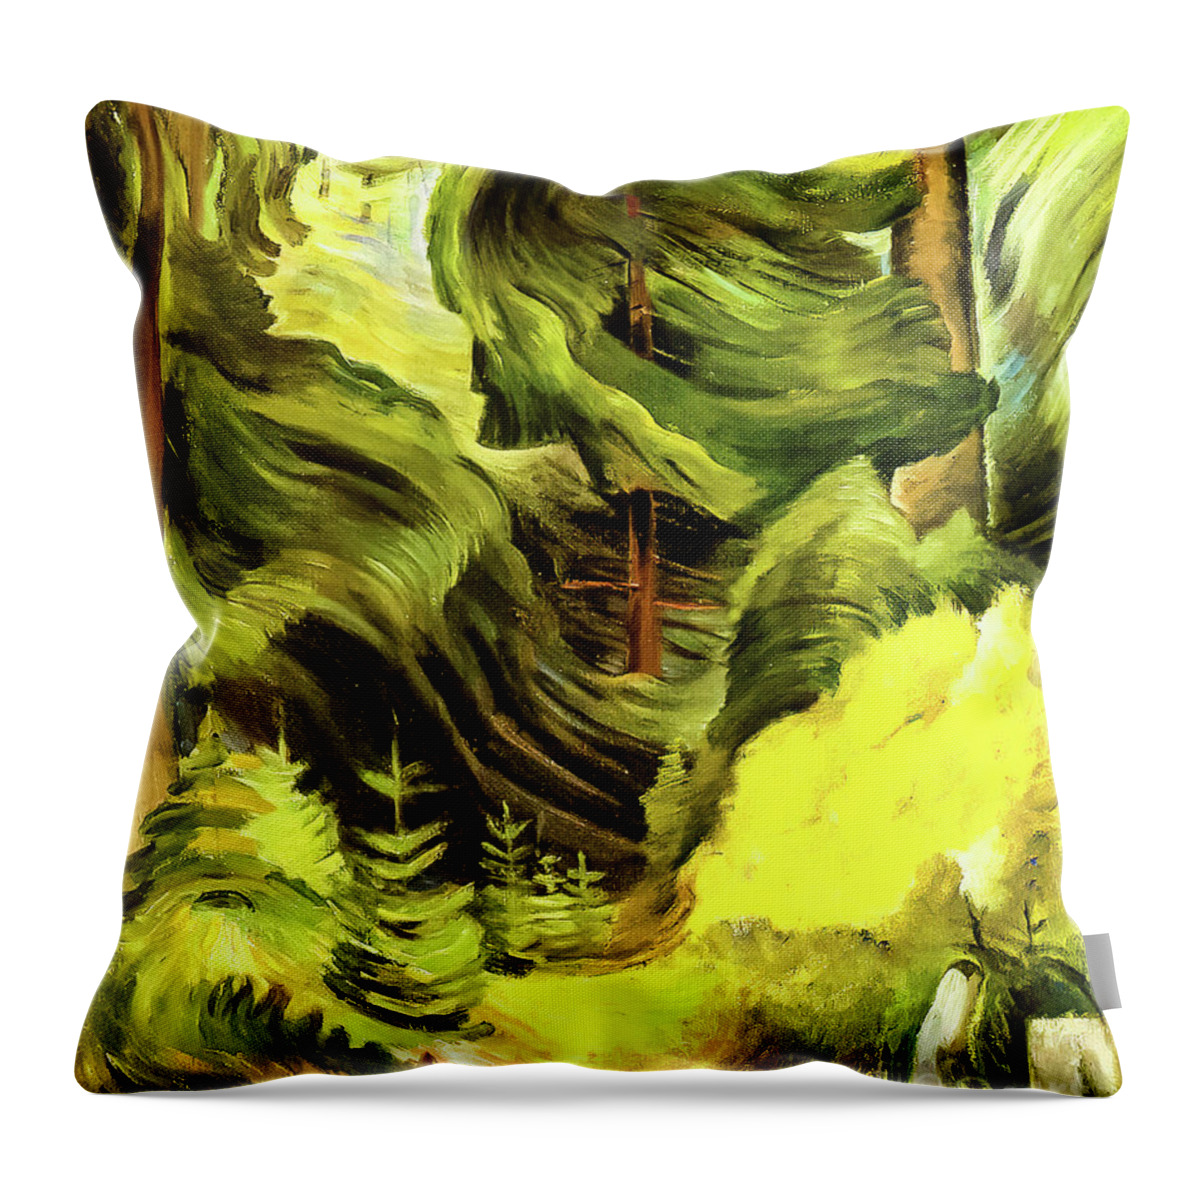 Swirl Throw Pillow featuring the painting Swirl by Emily Carr 1937 by Emily Carr